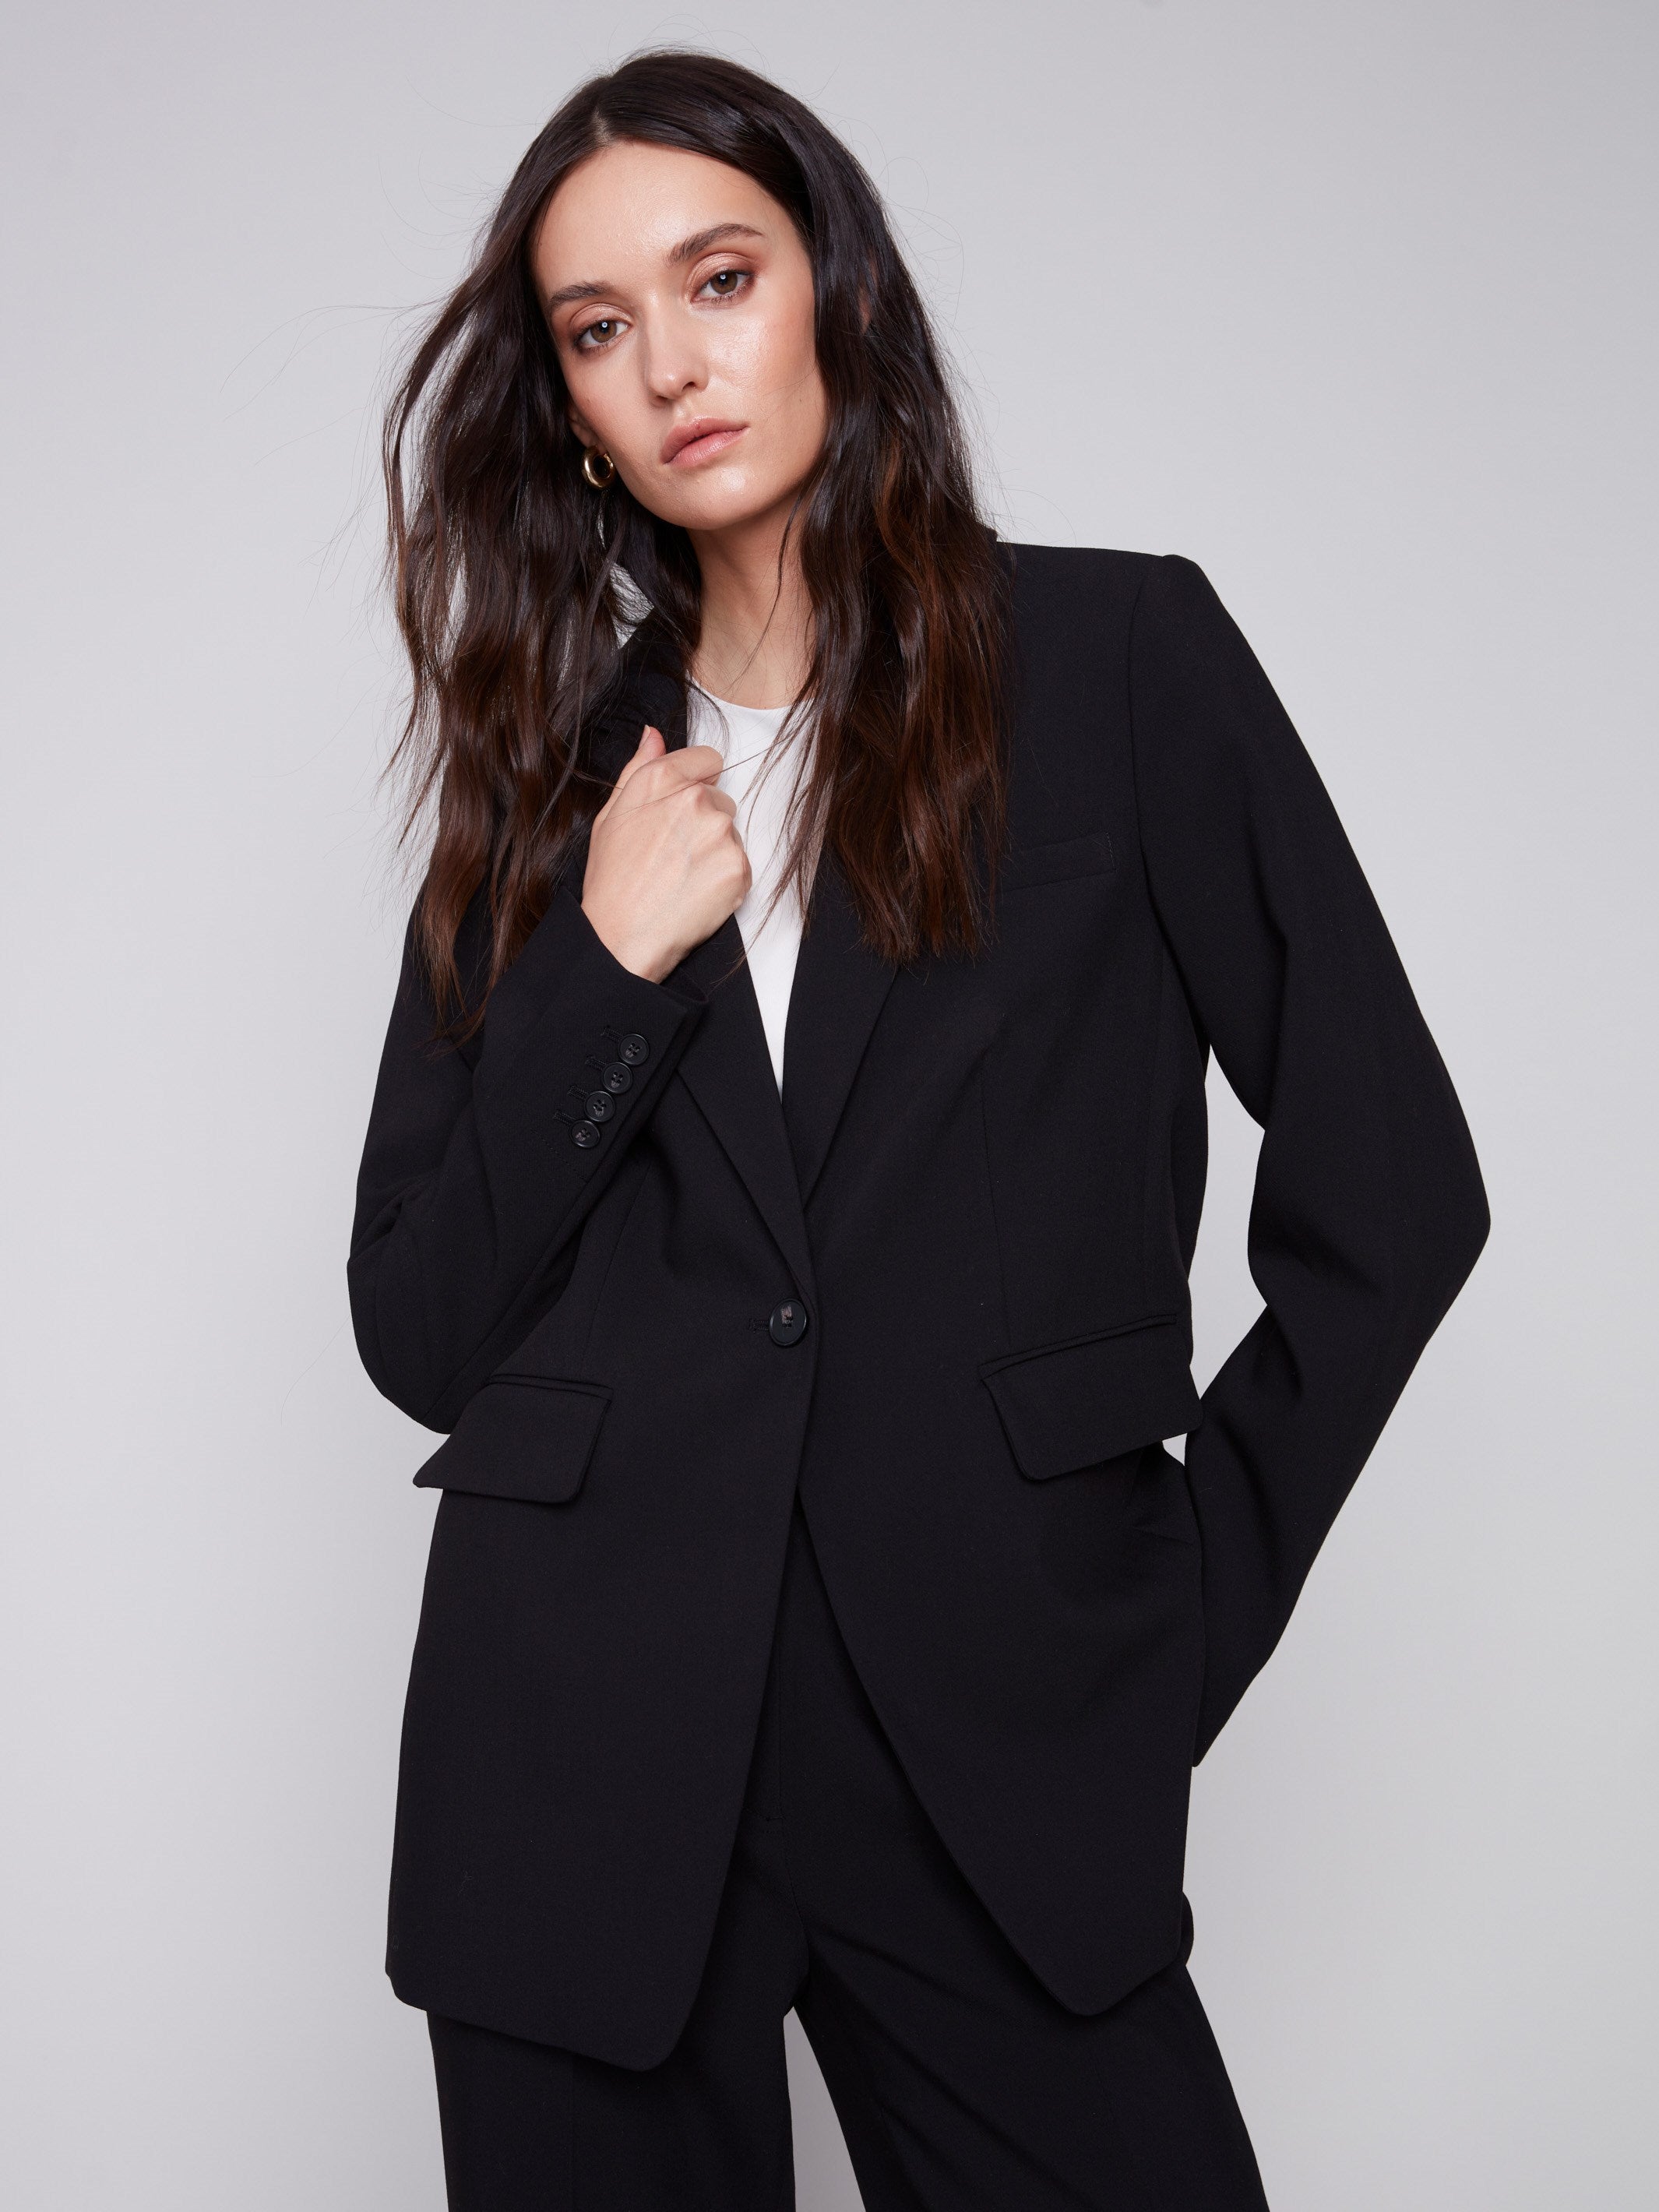 Blazer with Ruched Back - Black - Charlie B Collection Canada - Image 1